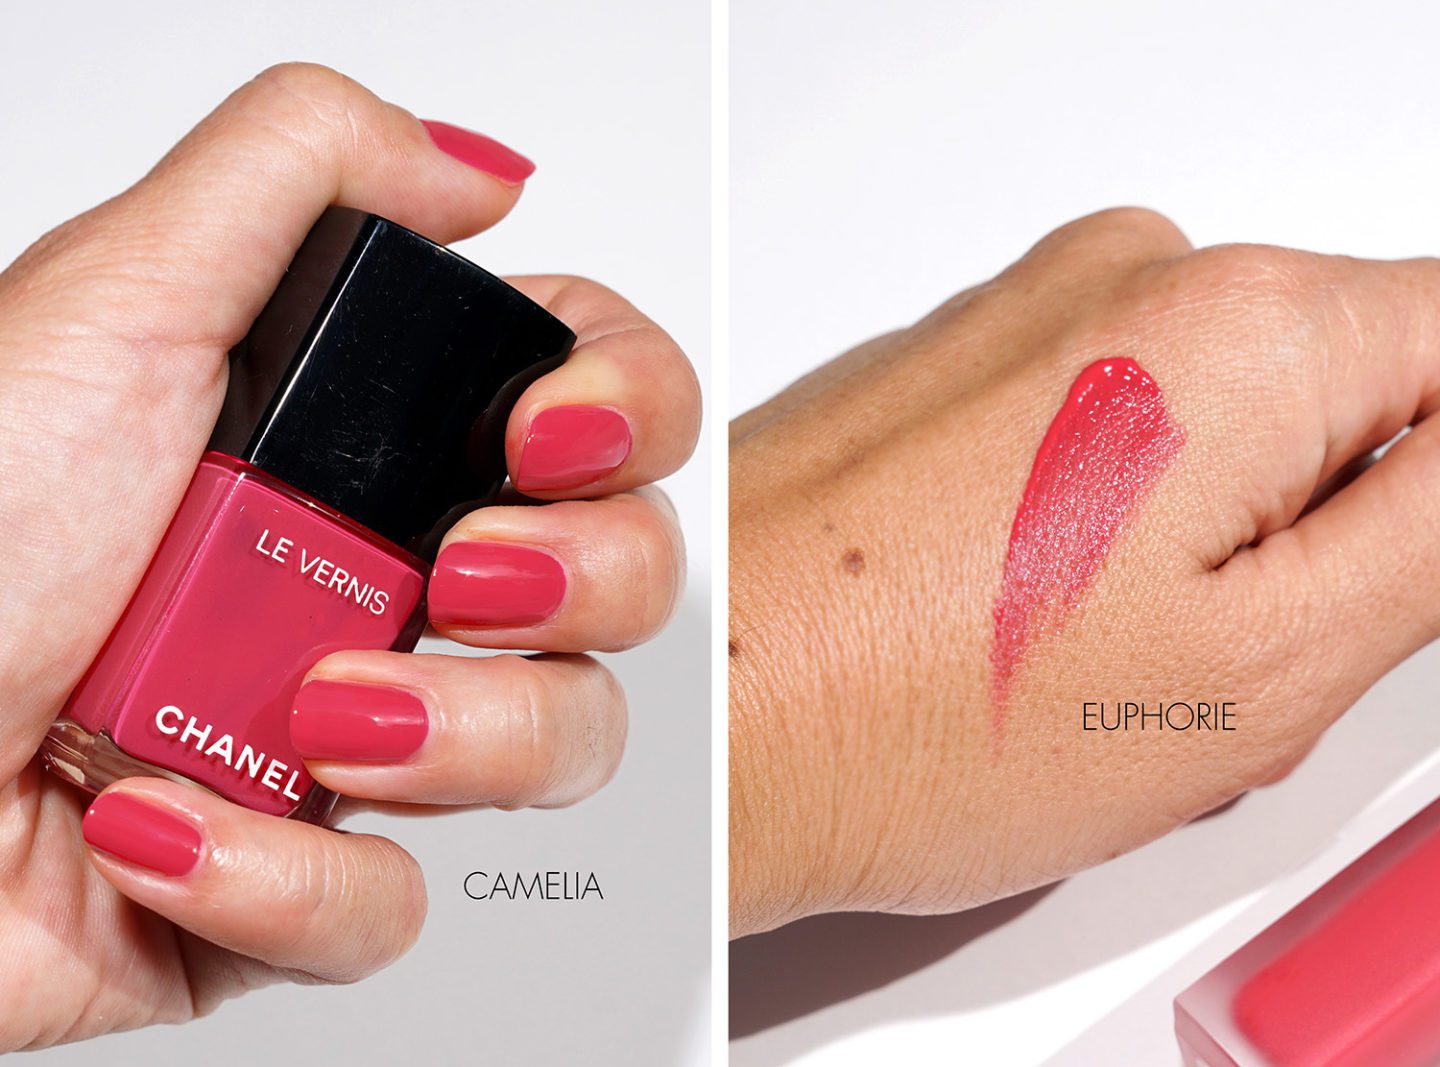 Chanel Le Vernis Camelia Rouge Allure Ink Euphorie swatches